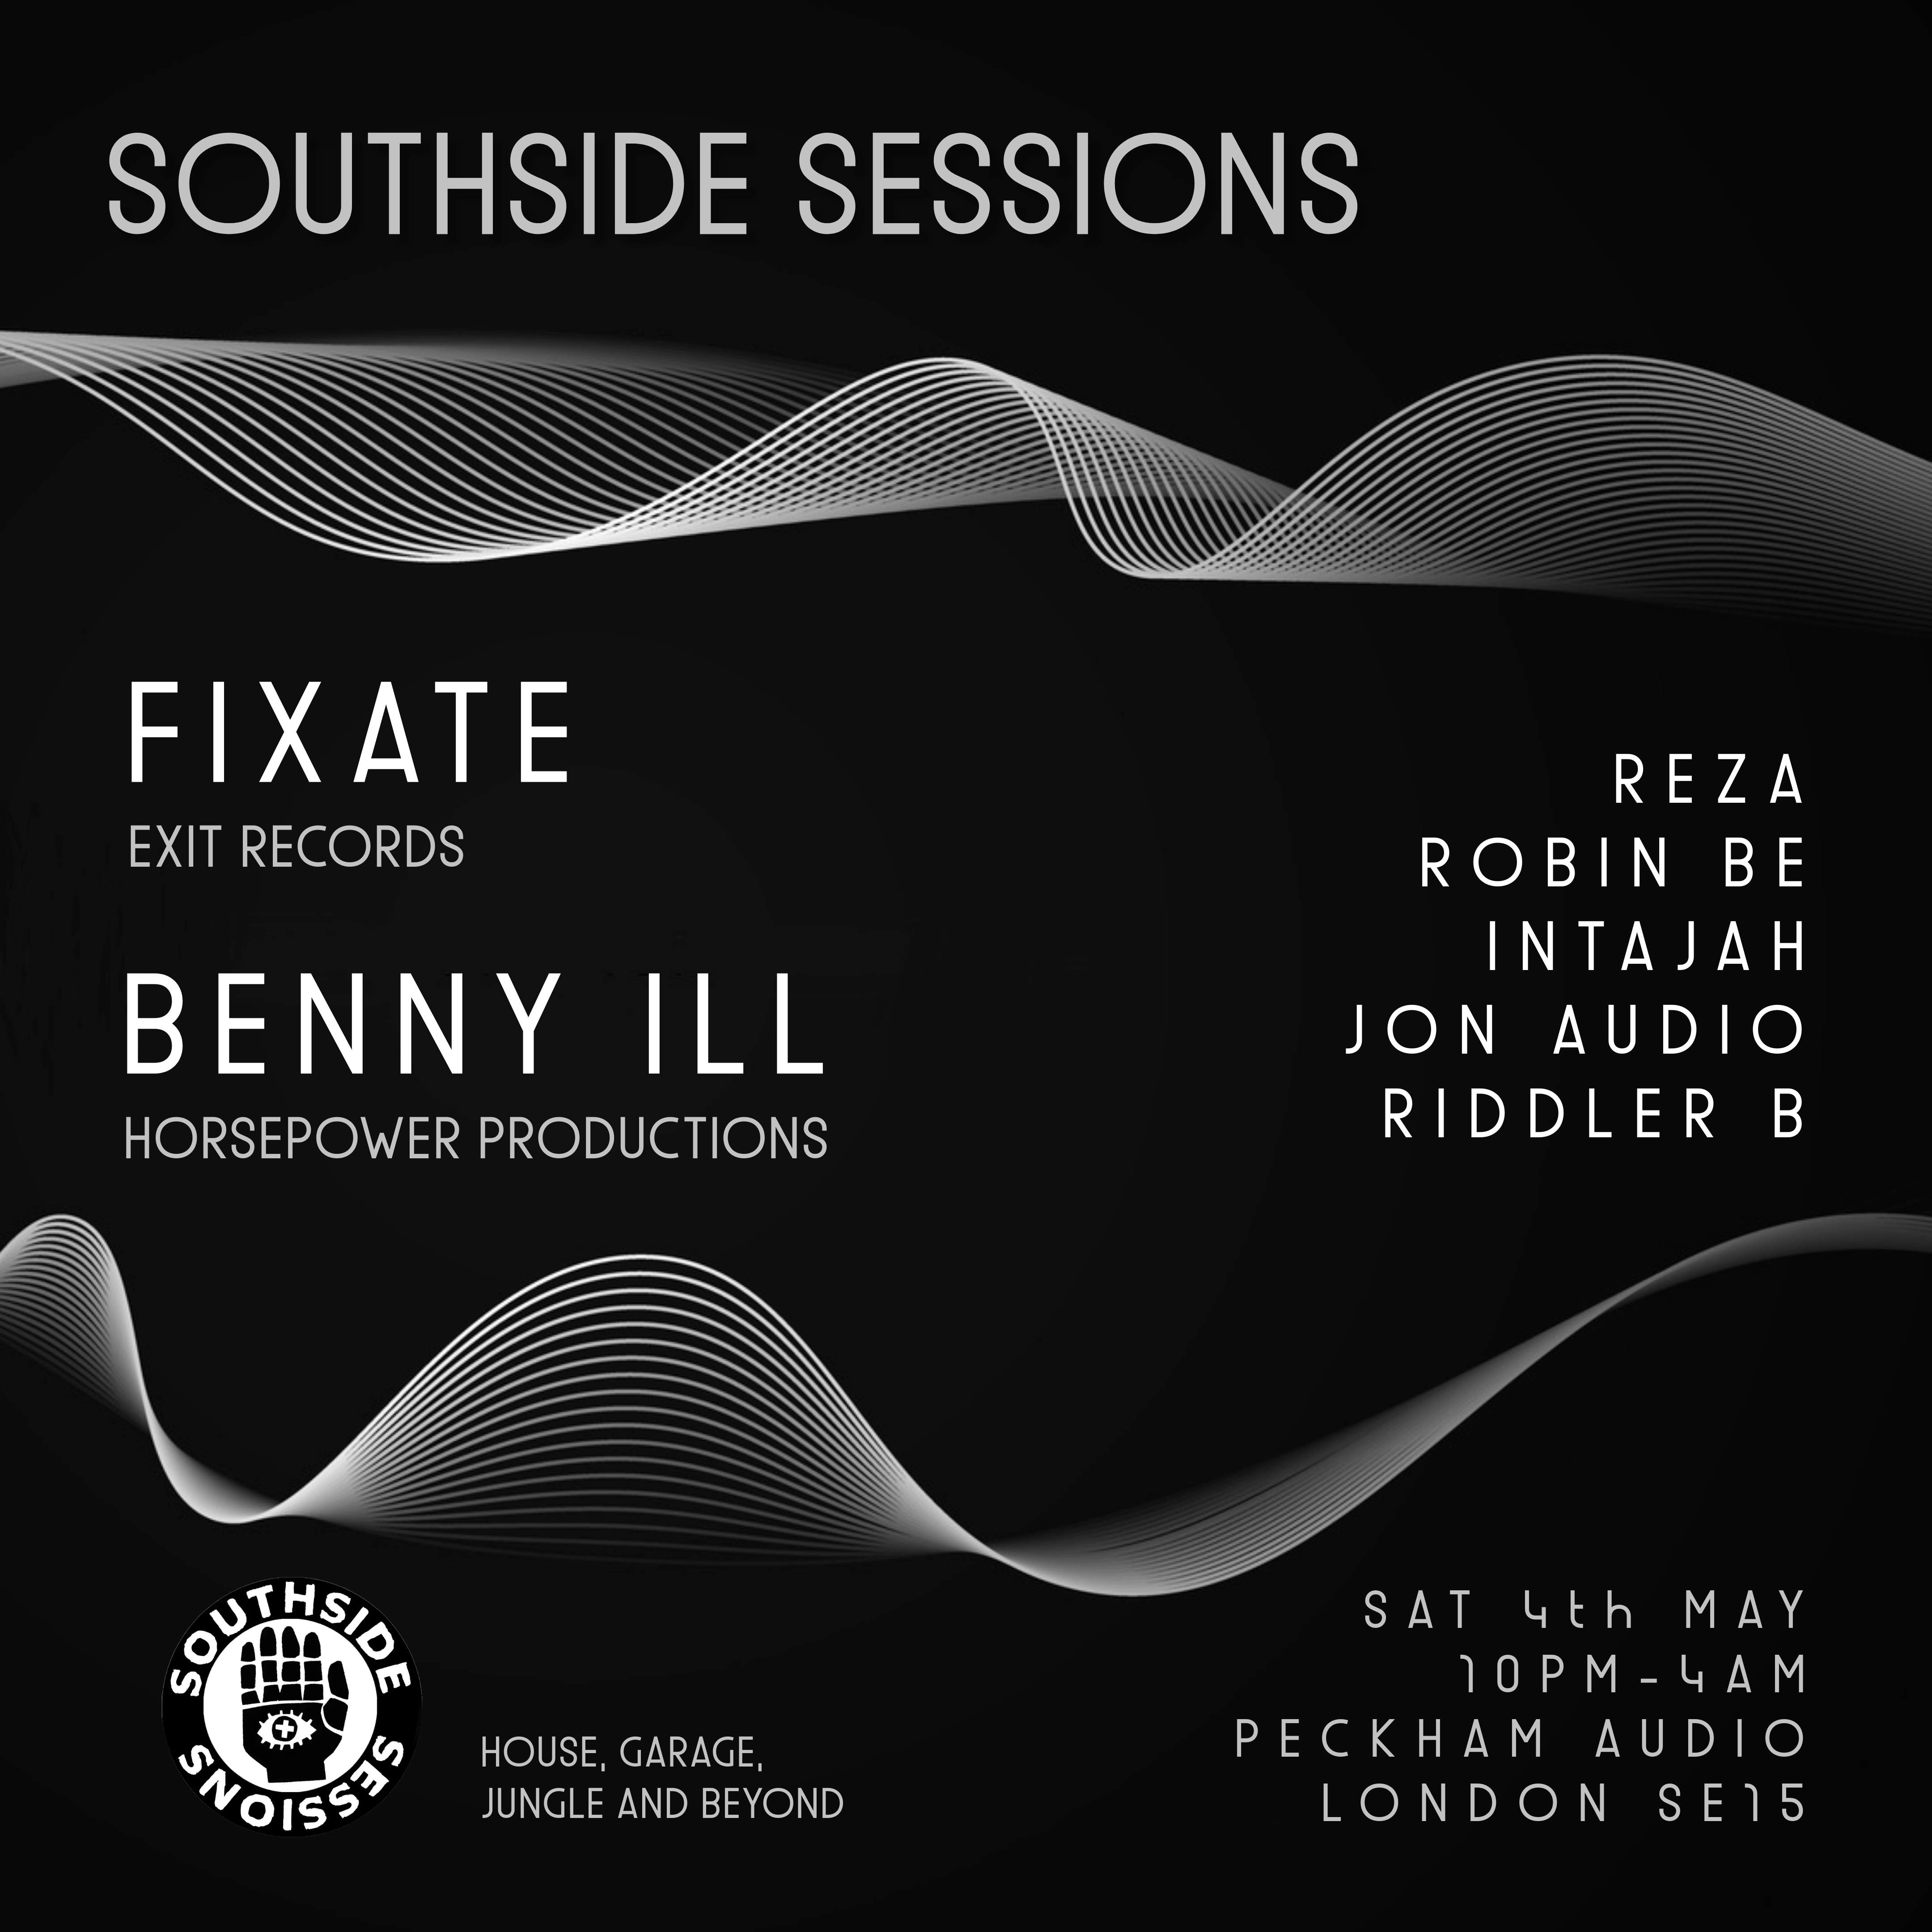 Southside Sessions: Fixate, Benny Ill [Garage, Jungle] - フライヤー表